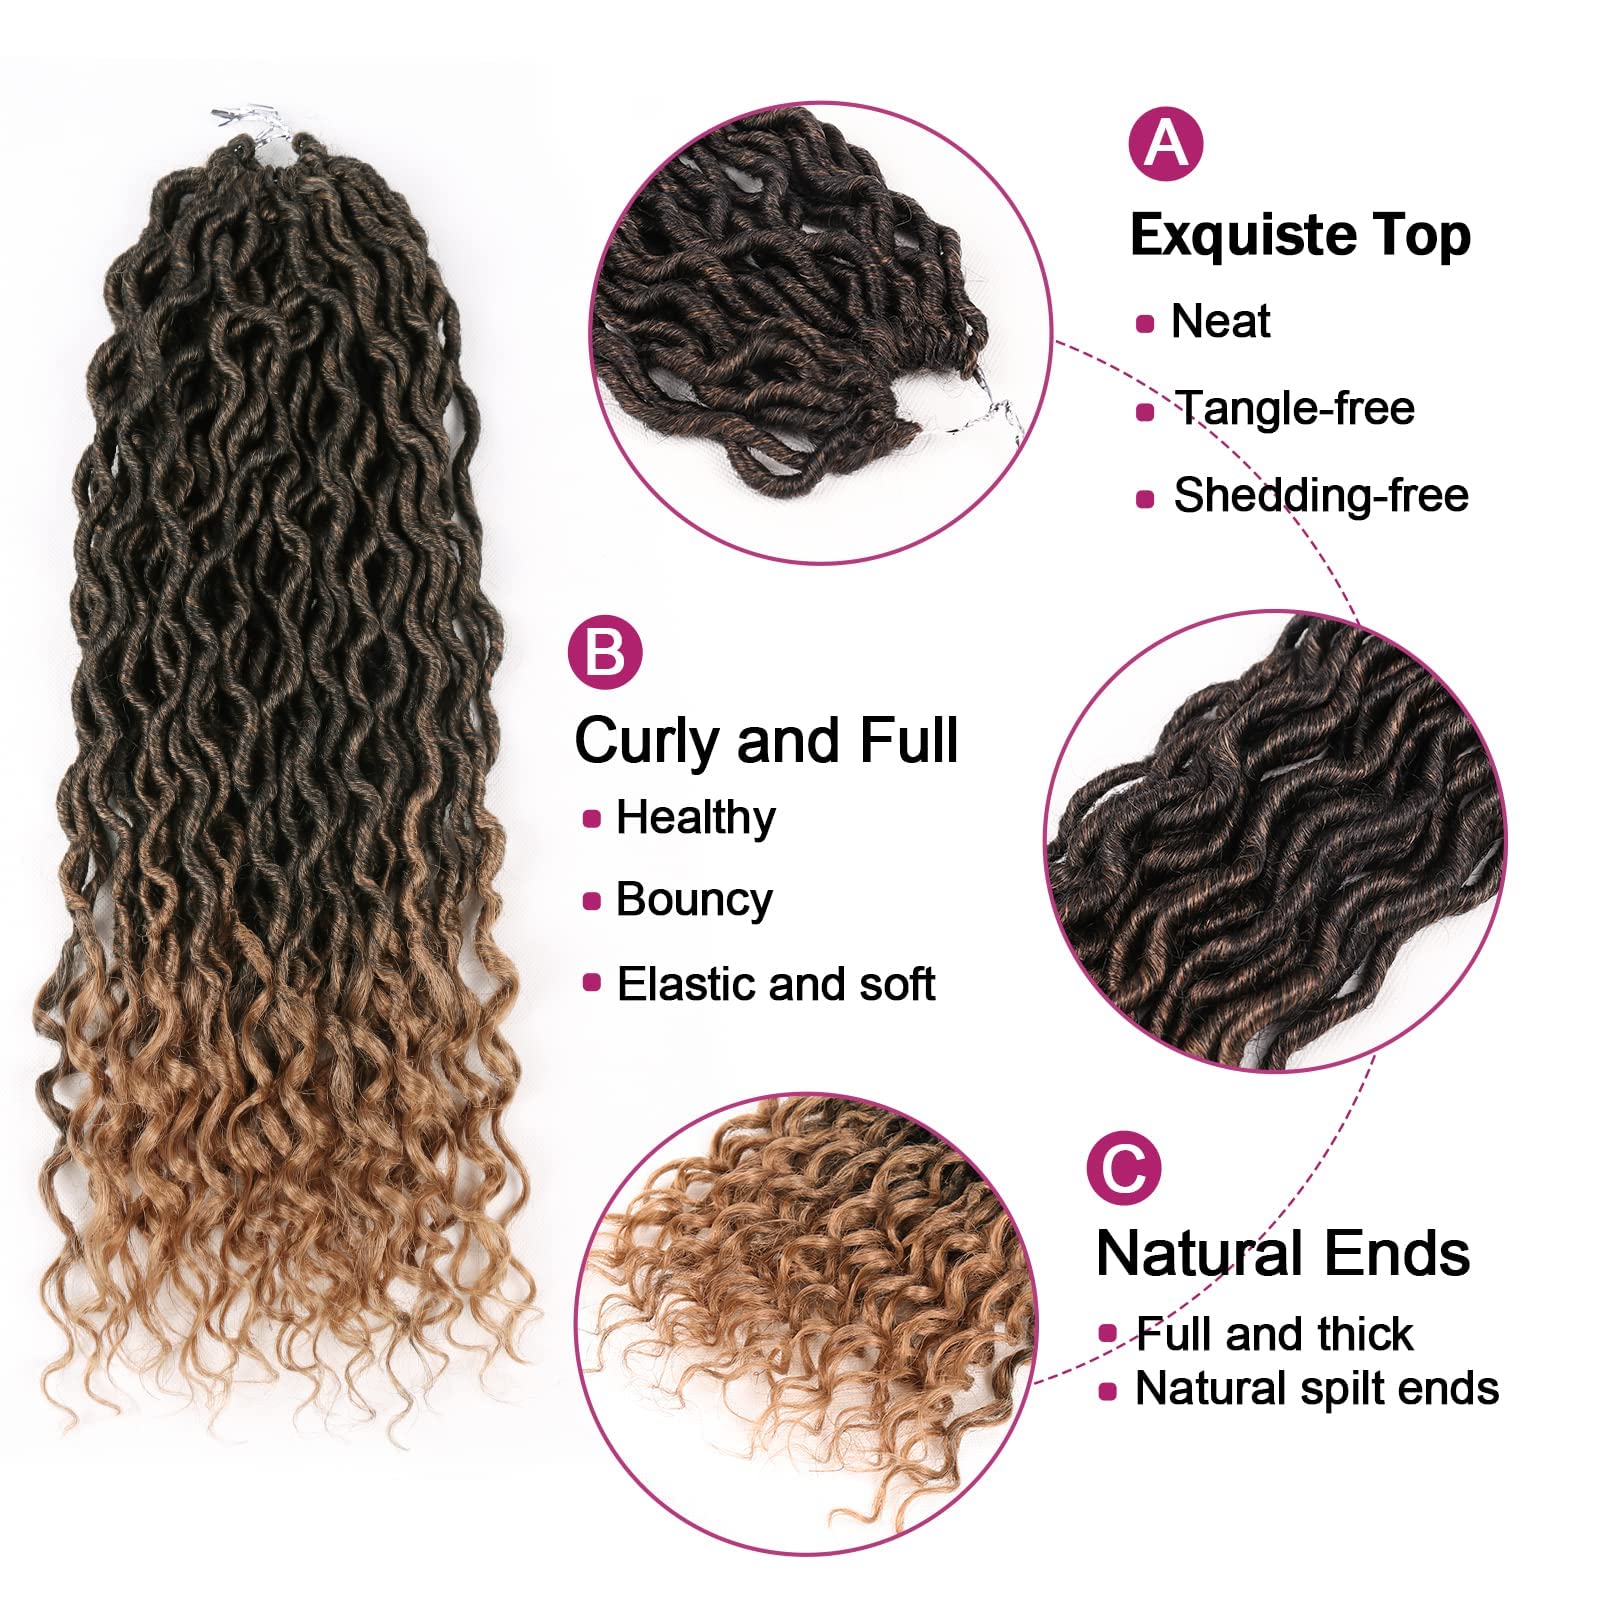 Goddess Locs Crochet Hair - 6 Packs 20 Inch Wavy Faux Locs Crochet Hair for Black Women, Ombre Faux Locs Crochet Hair with Curly Ends Synthetic Braids Hair Extensions (20Inch, T1B-27#)